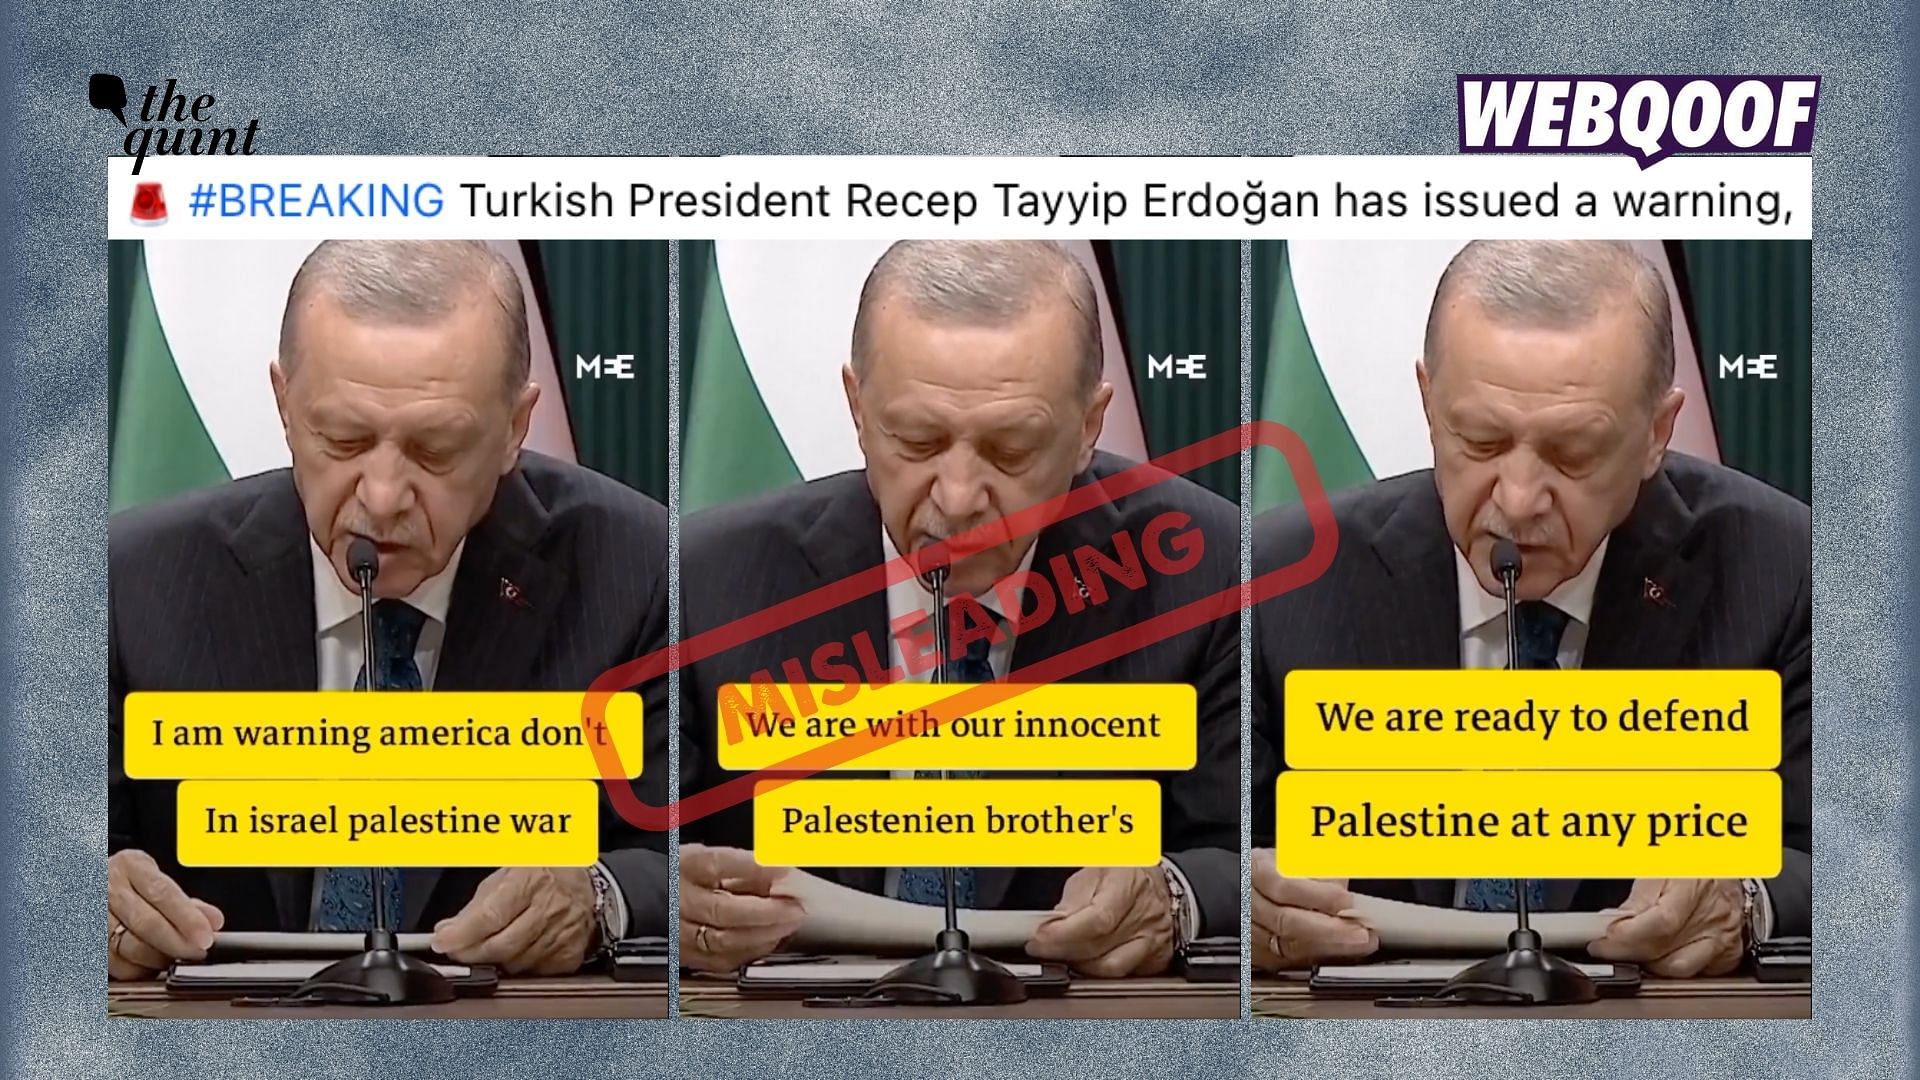 <div class="paragraphs"><p>The video shows altered captions to falsely claim that Turkish President Recep Tayyip Erdoğan warned Americans to stay away from the Israel-Palestine conflict.</p></div>